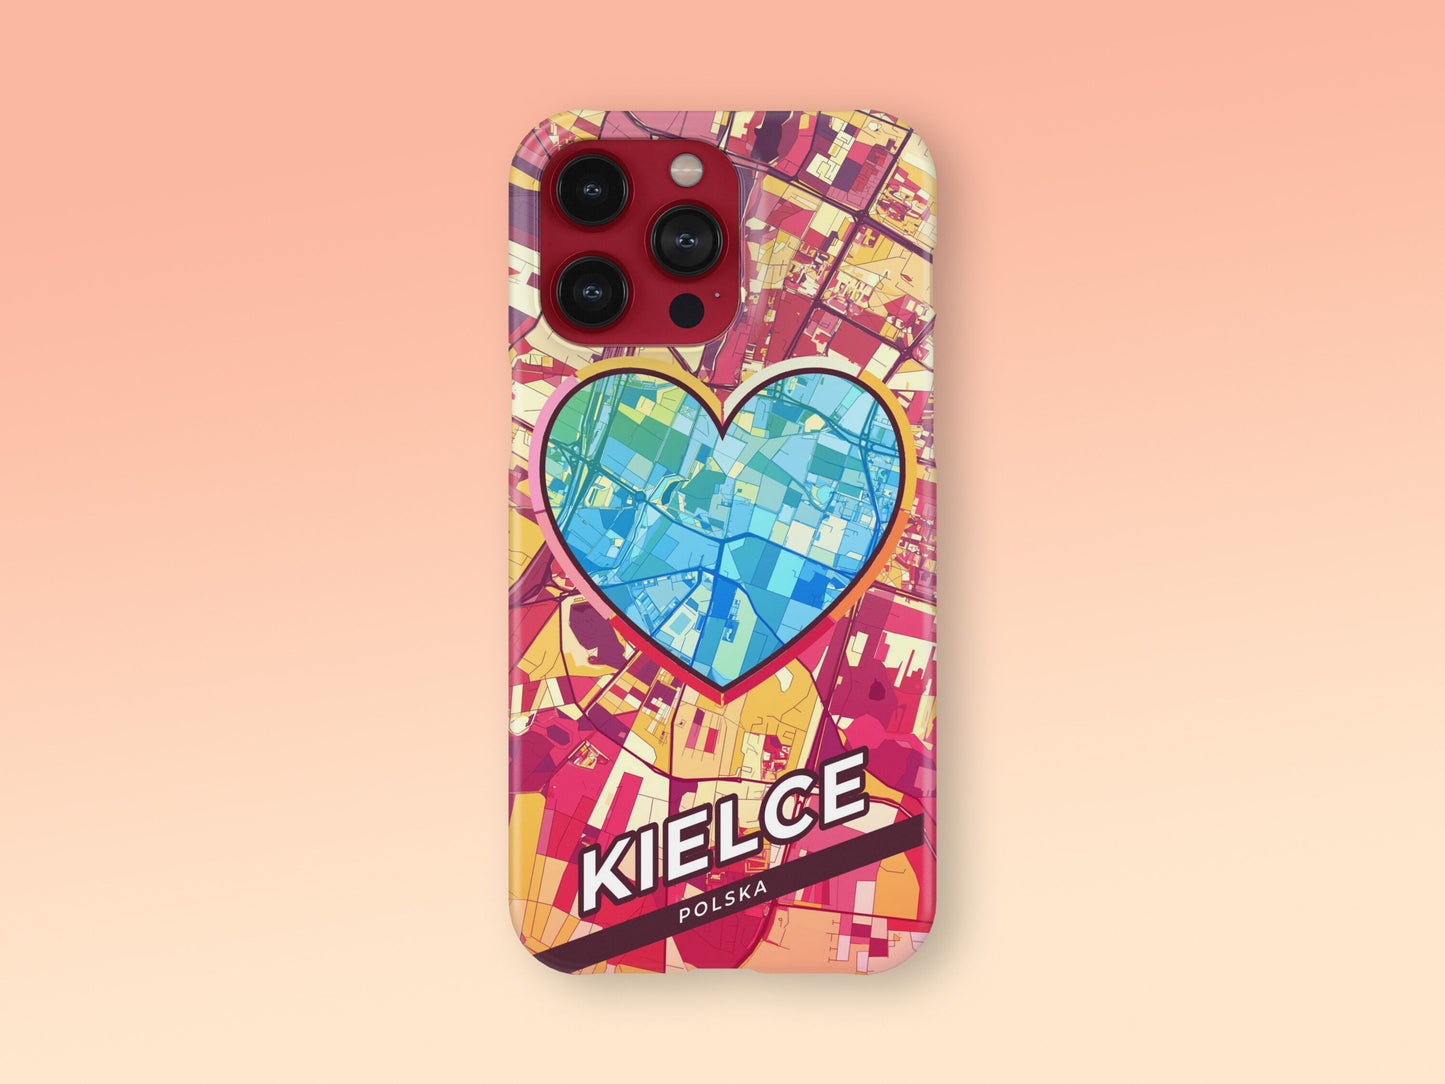 Kielce Poland slim phone case with colorful icon. Birthday, wedding or housewarming gift. Couple match cases. 2